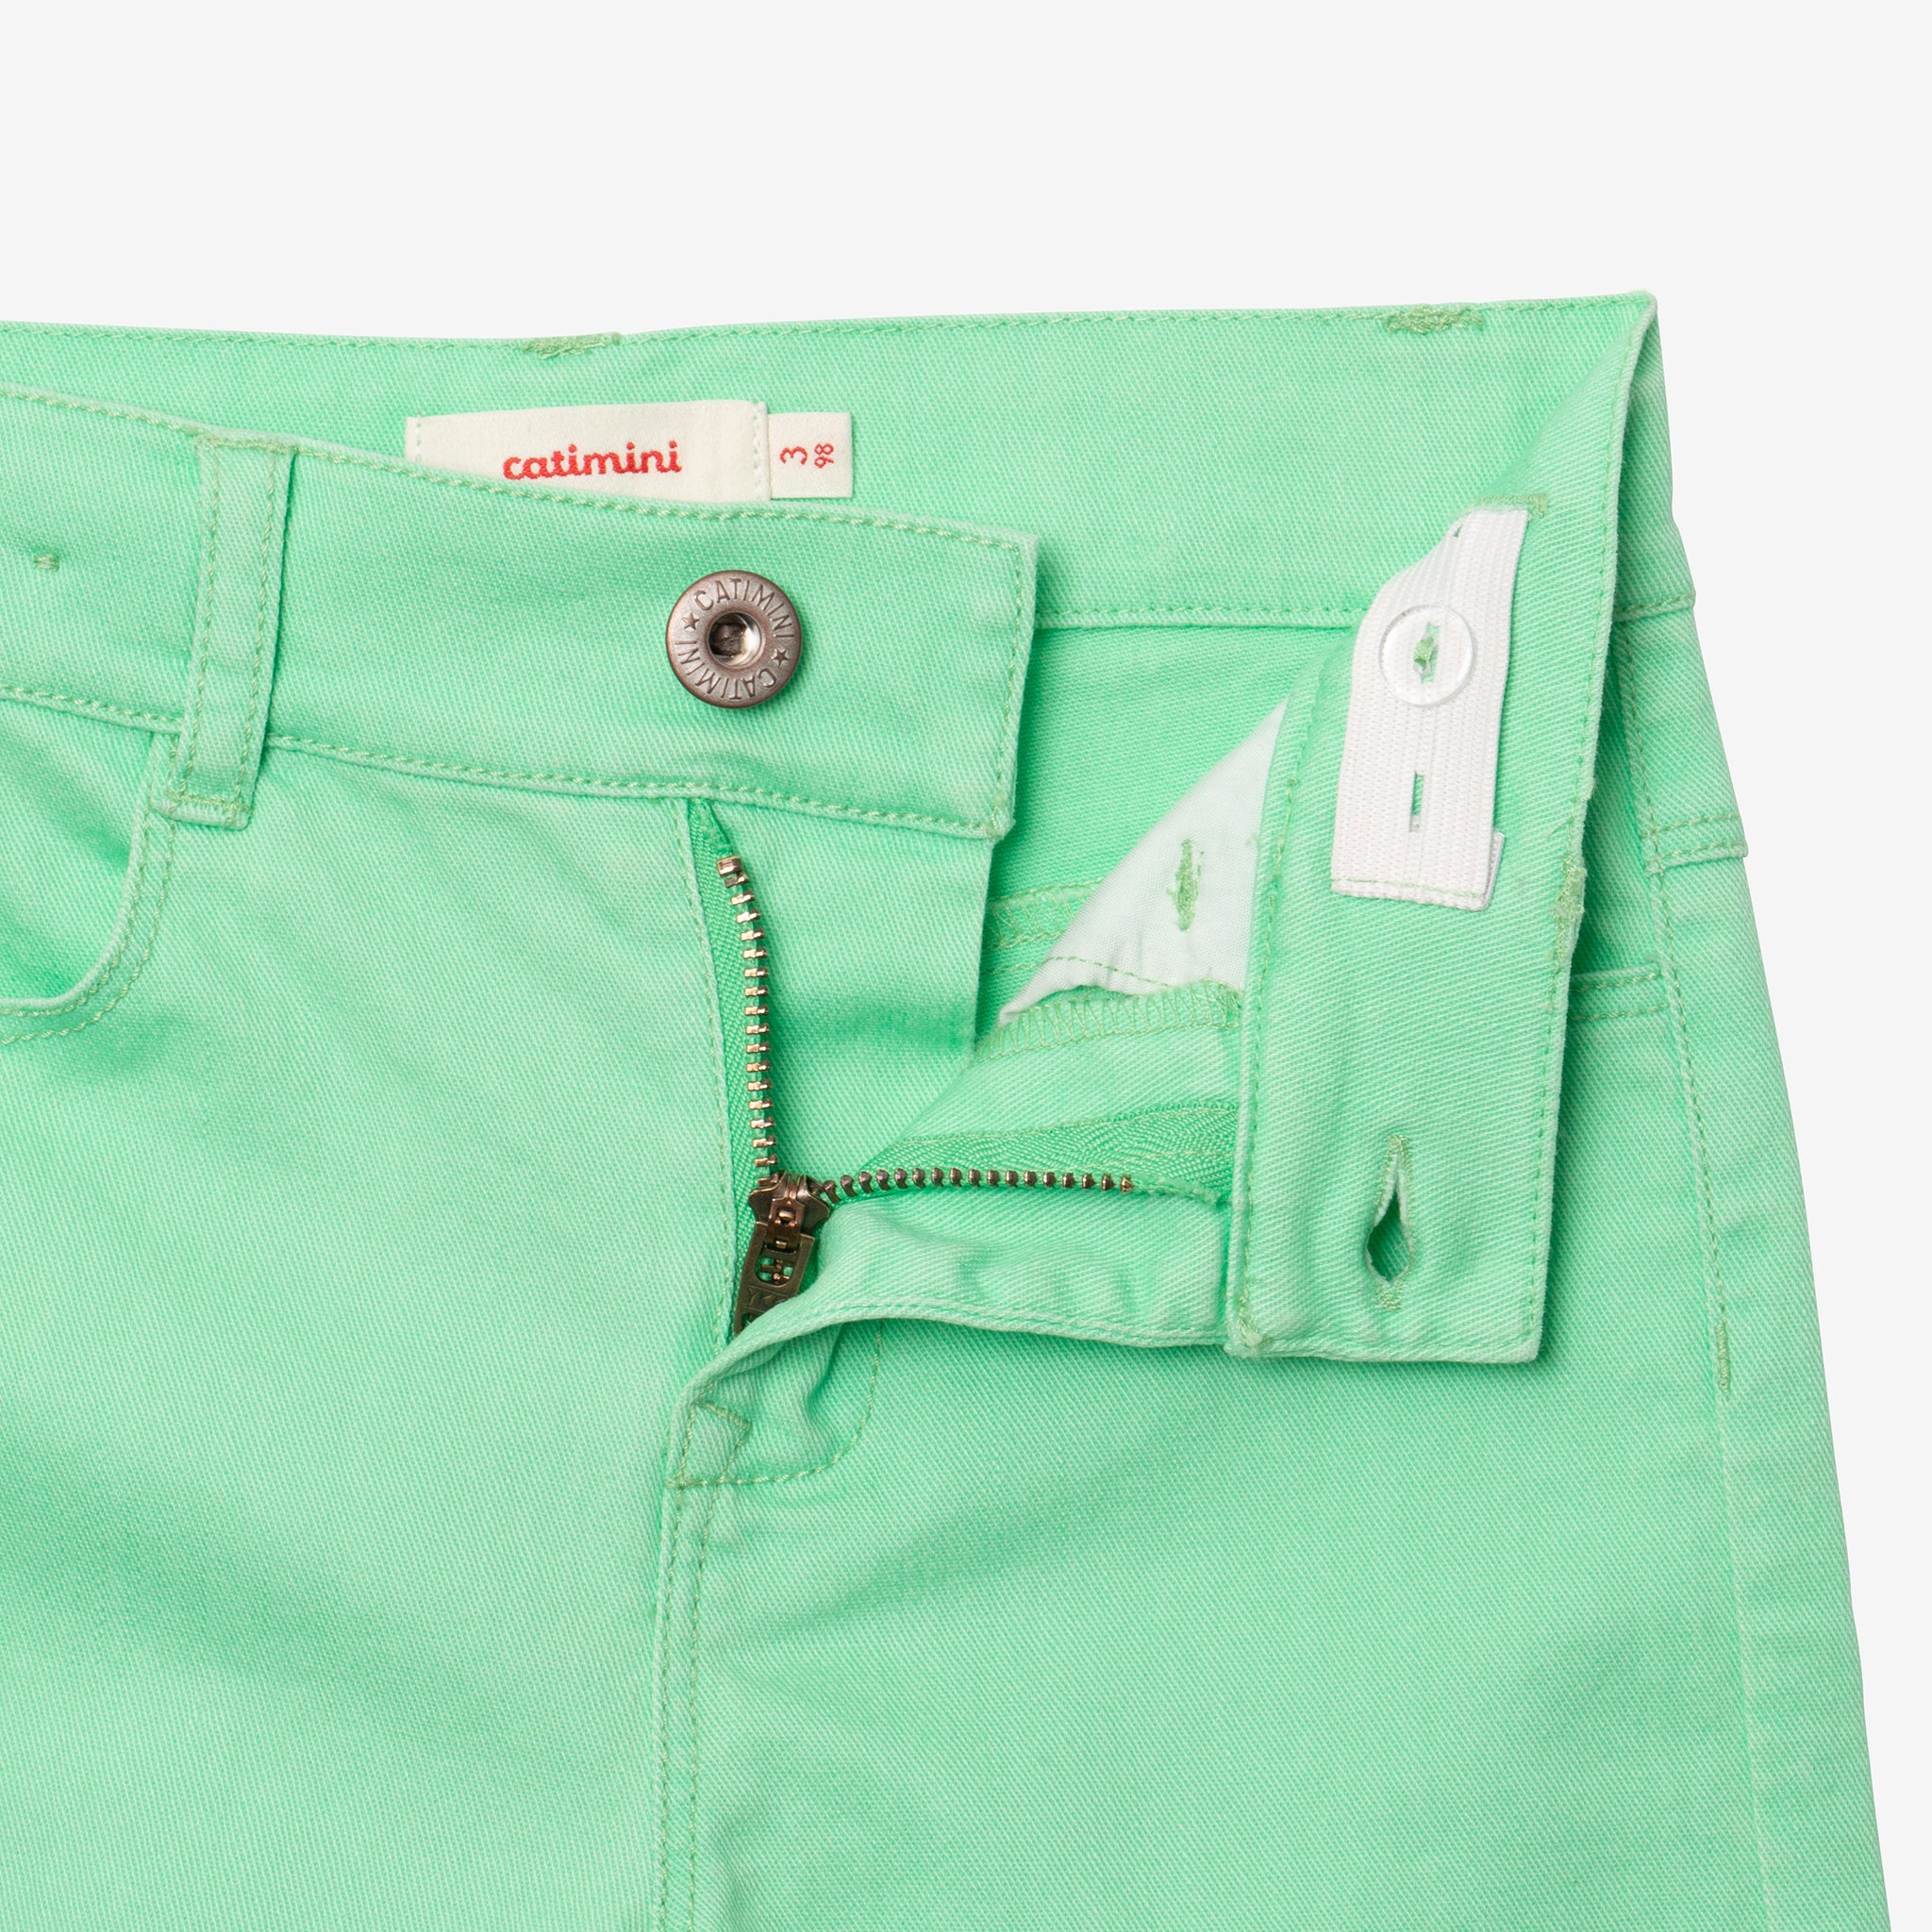 Relaxed Tapered Fit Trousers - Bright green - Kids | H&M IN